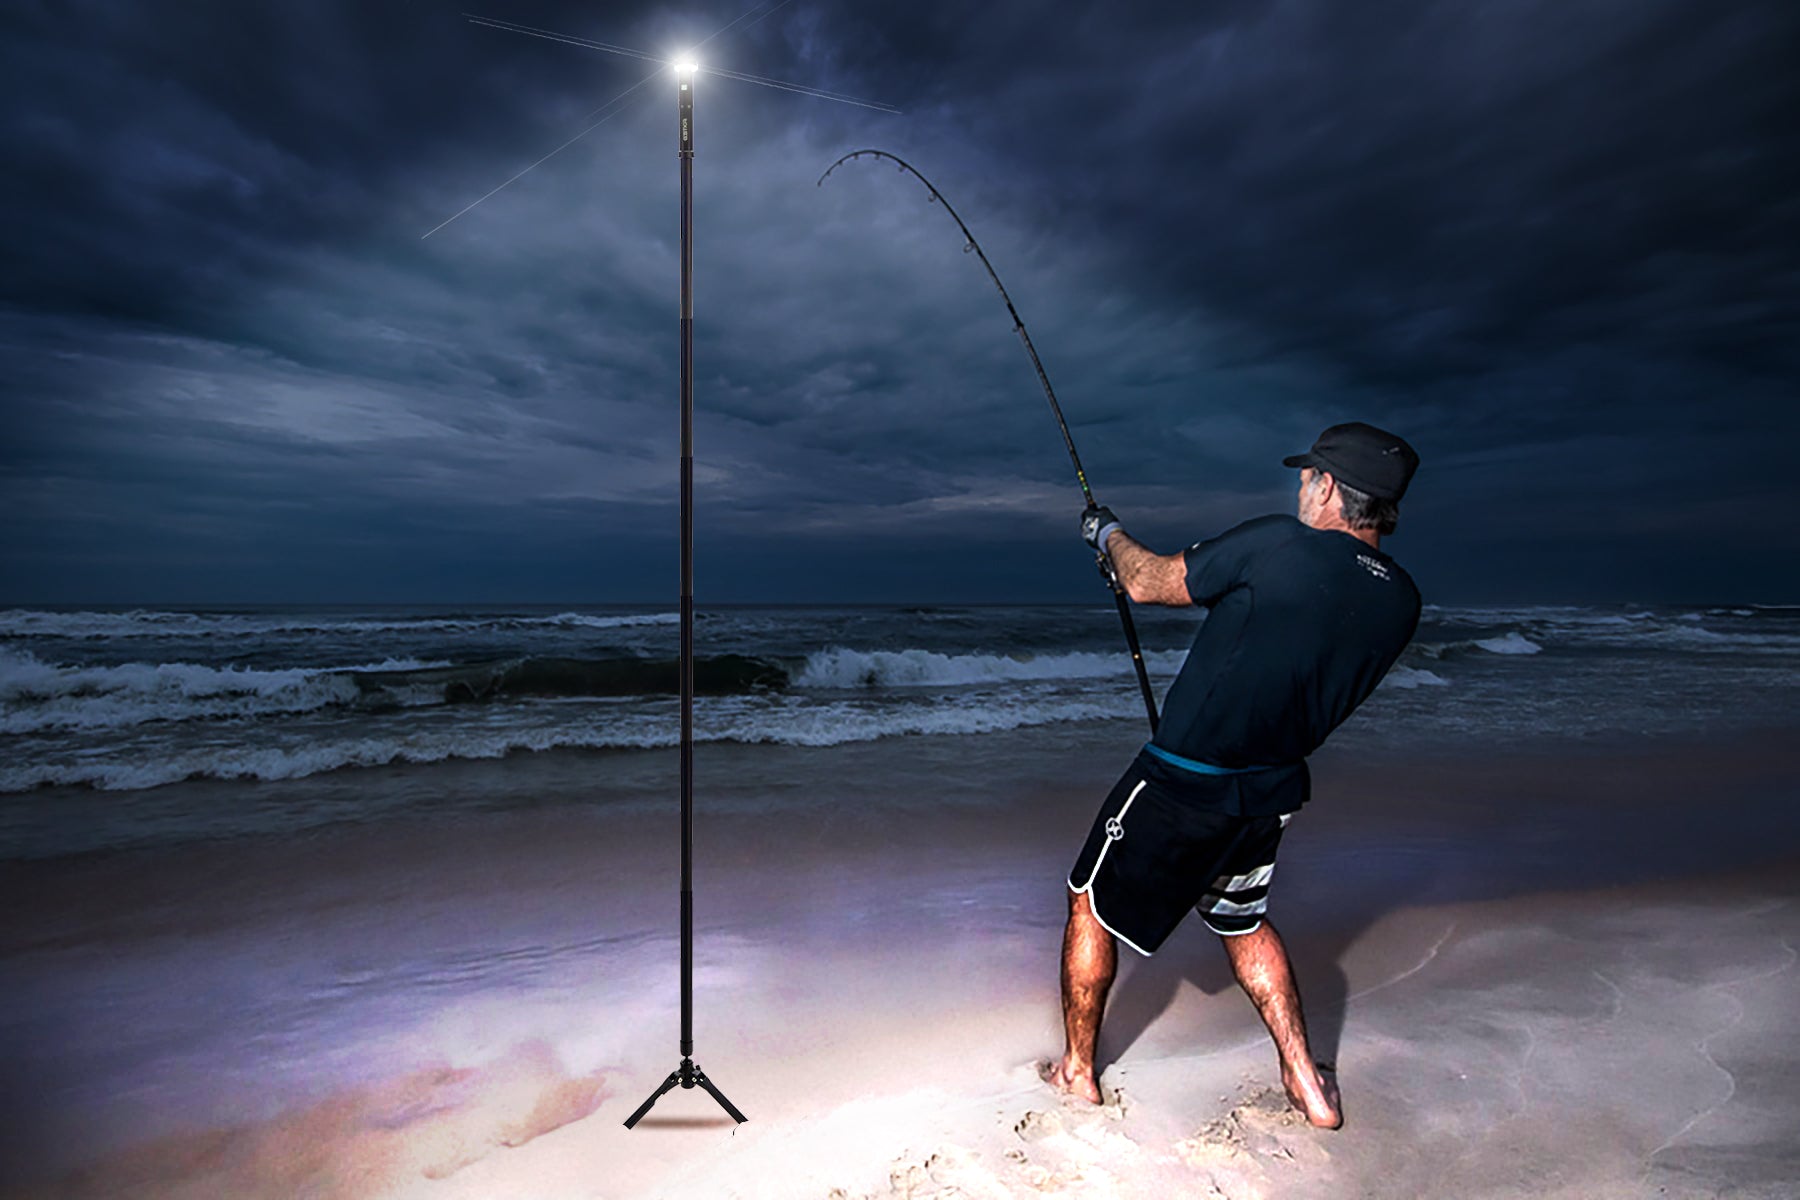 How Many Lumens Do You Need For Fishing At Night?